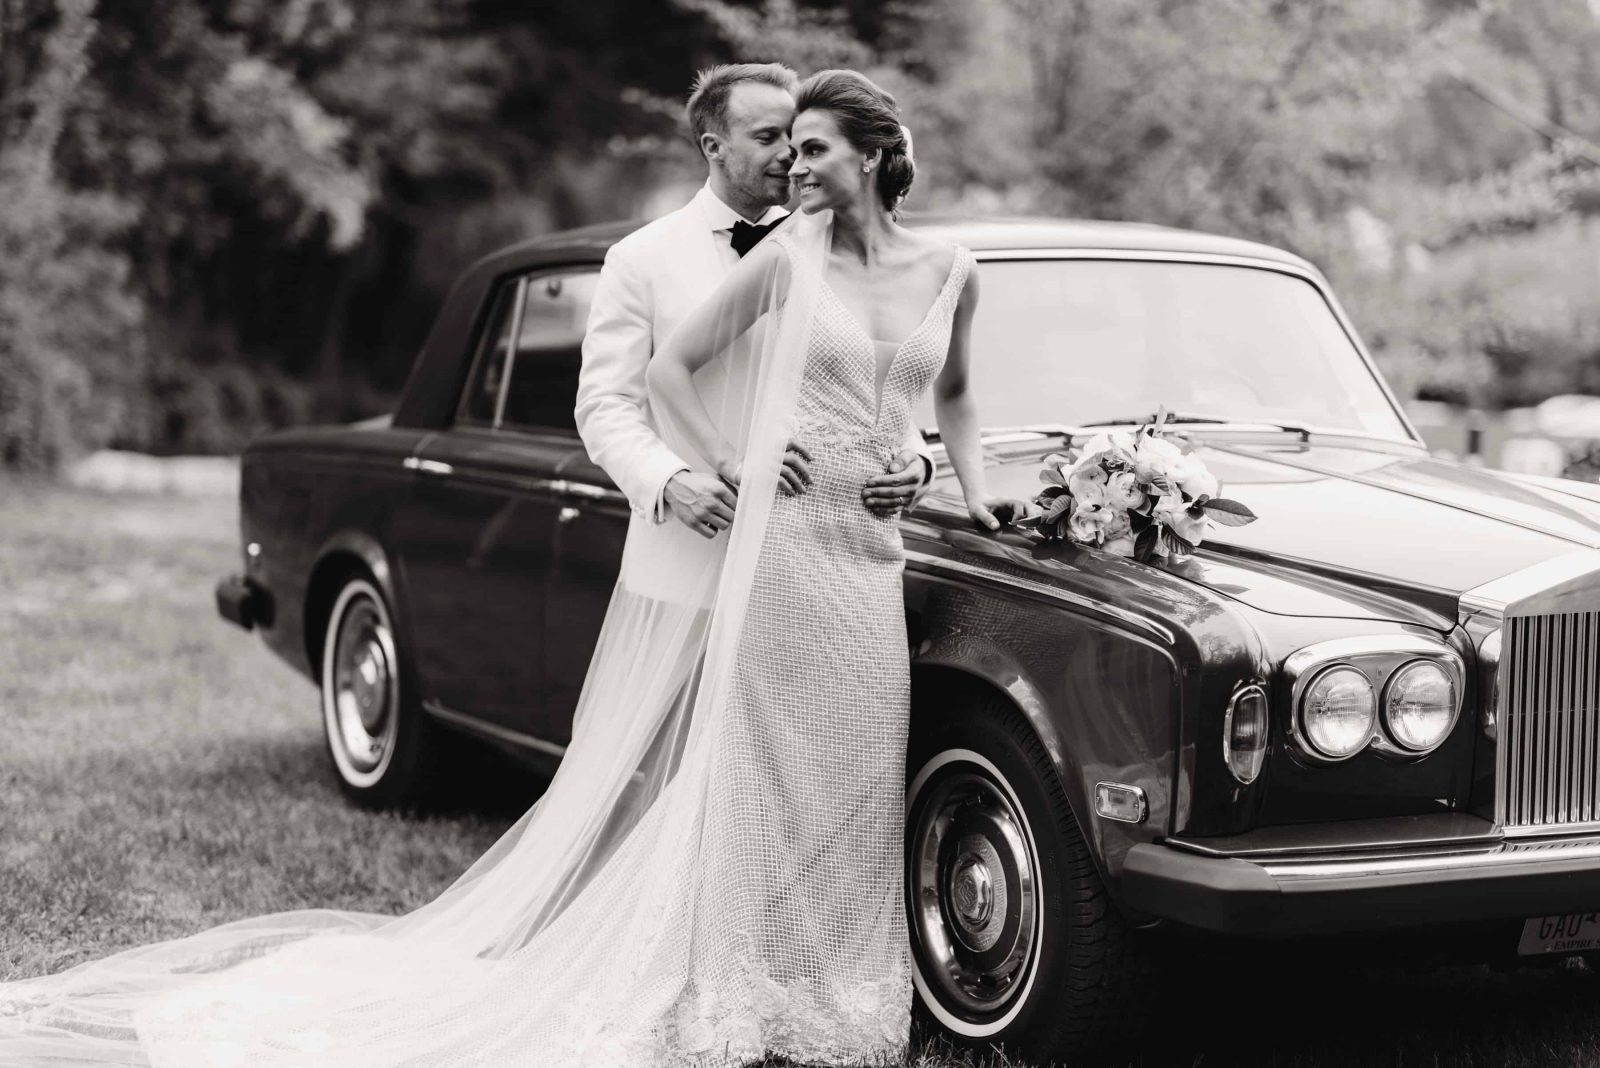 Black and white photo of newlyweds standing next to a classic car